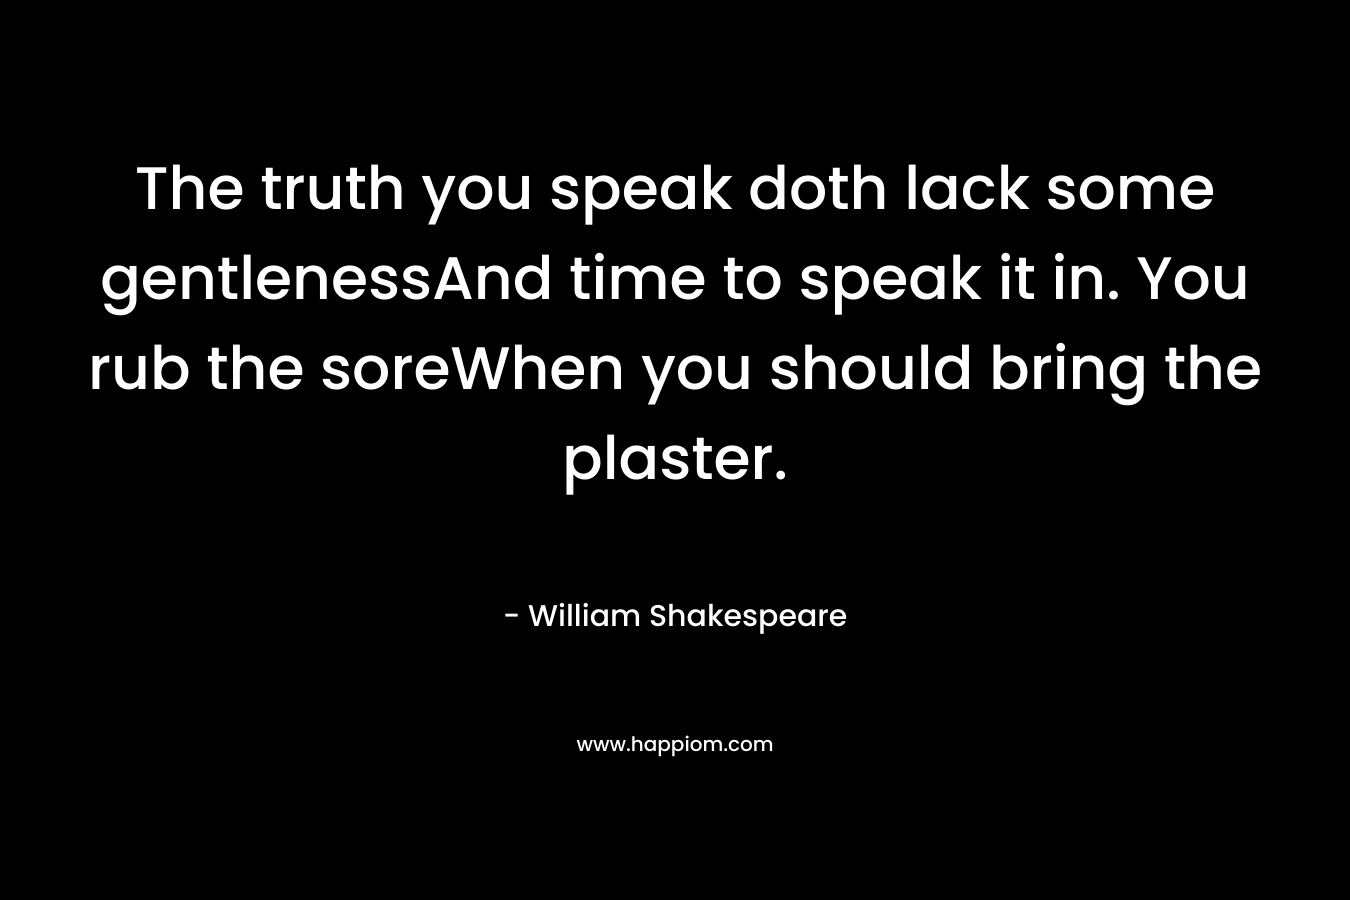 The truth you speak doth lack some gentlenessAnd time to speak it in. You rub the soreWhen you should bring the plaster. – William Shakespeare